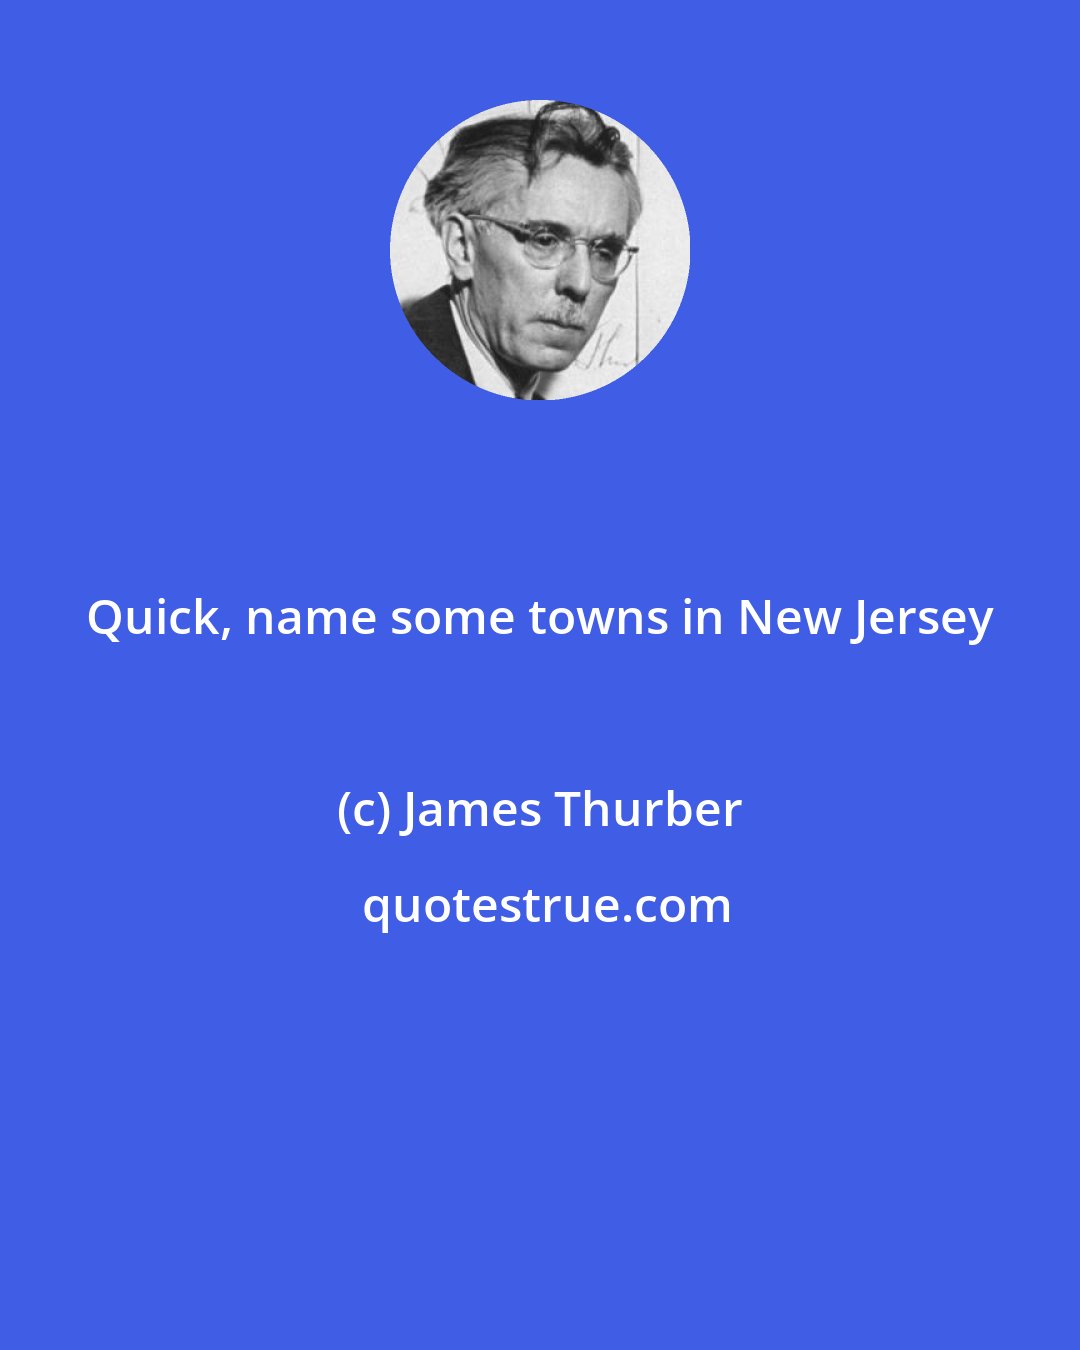 James Thurber: Quick, name some towns in New Jersey